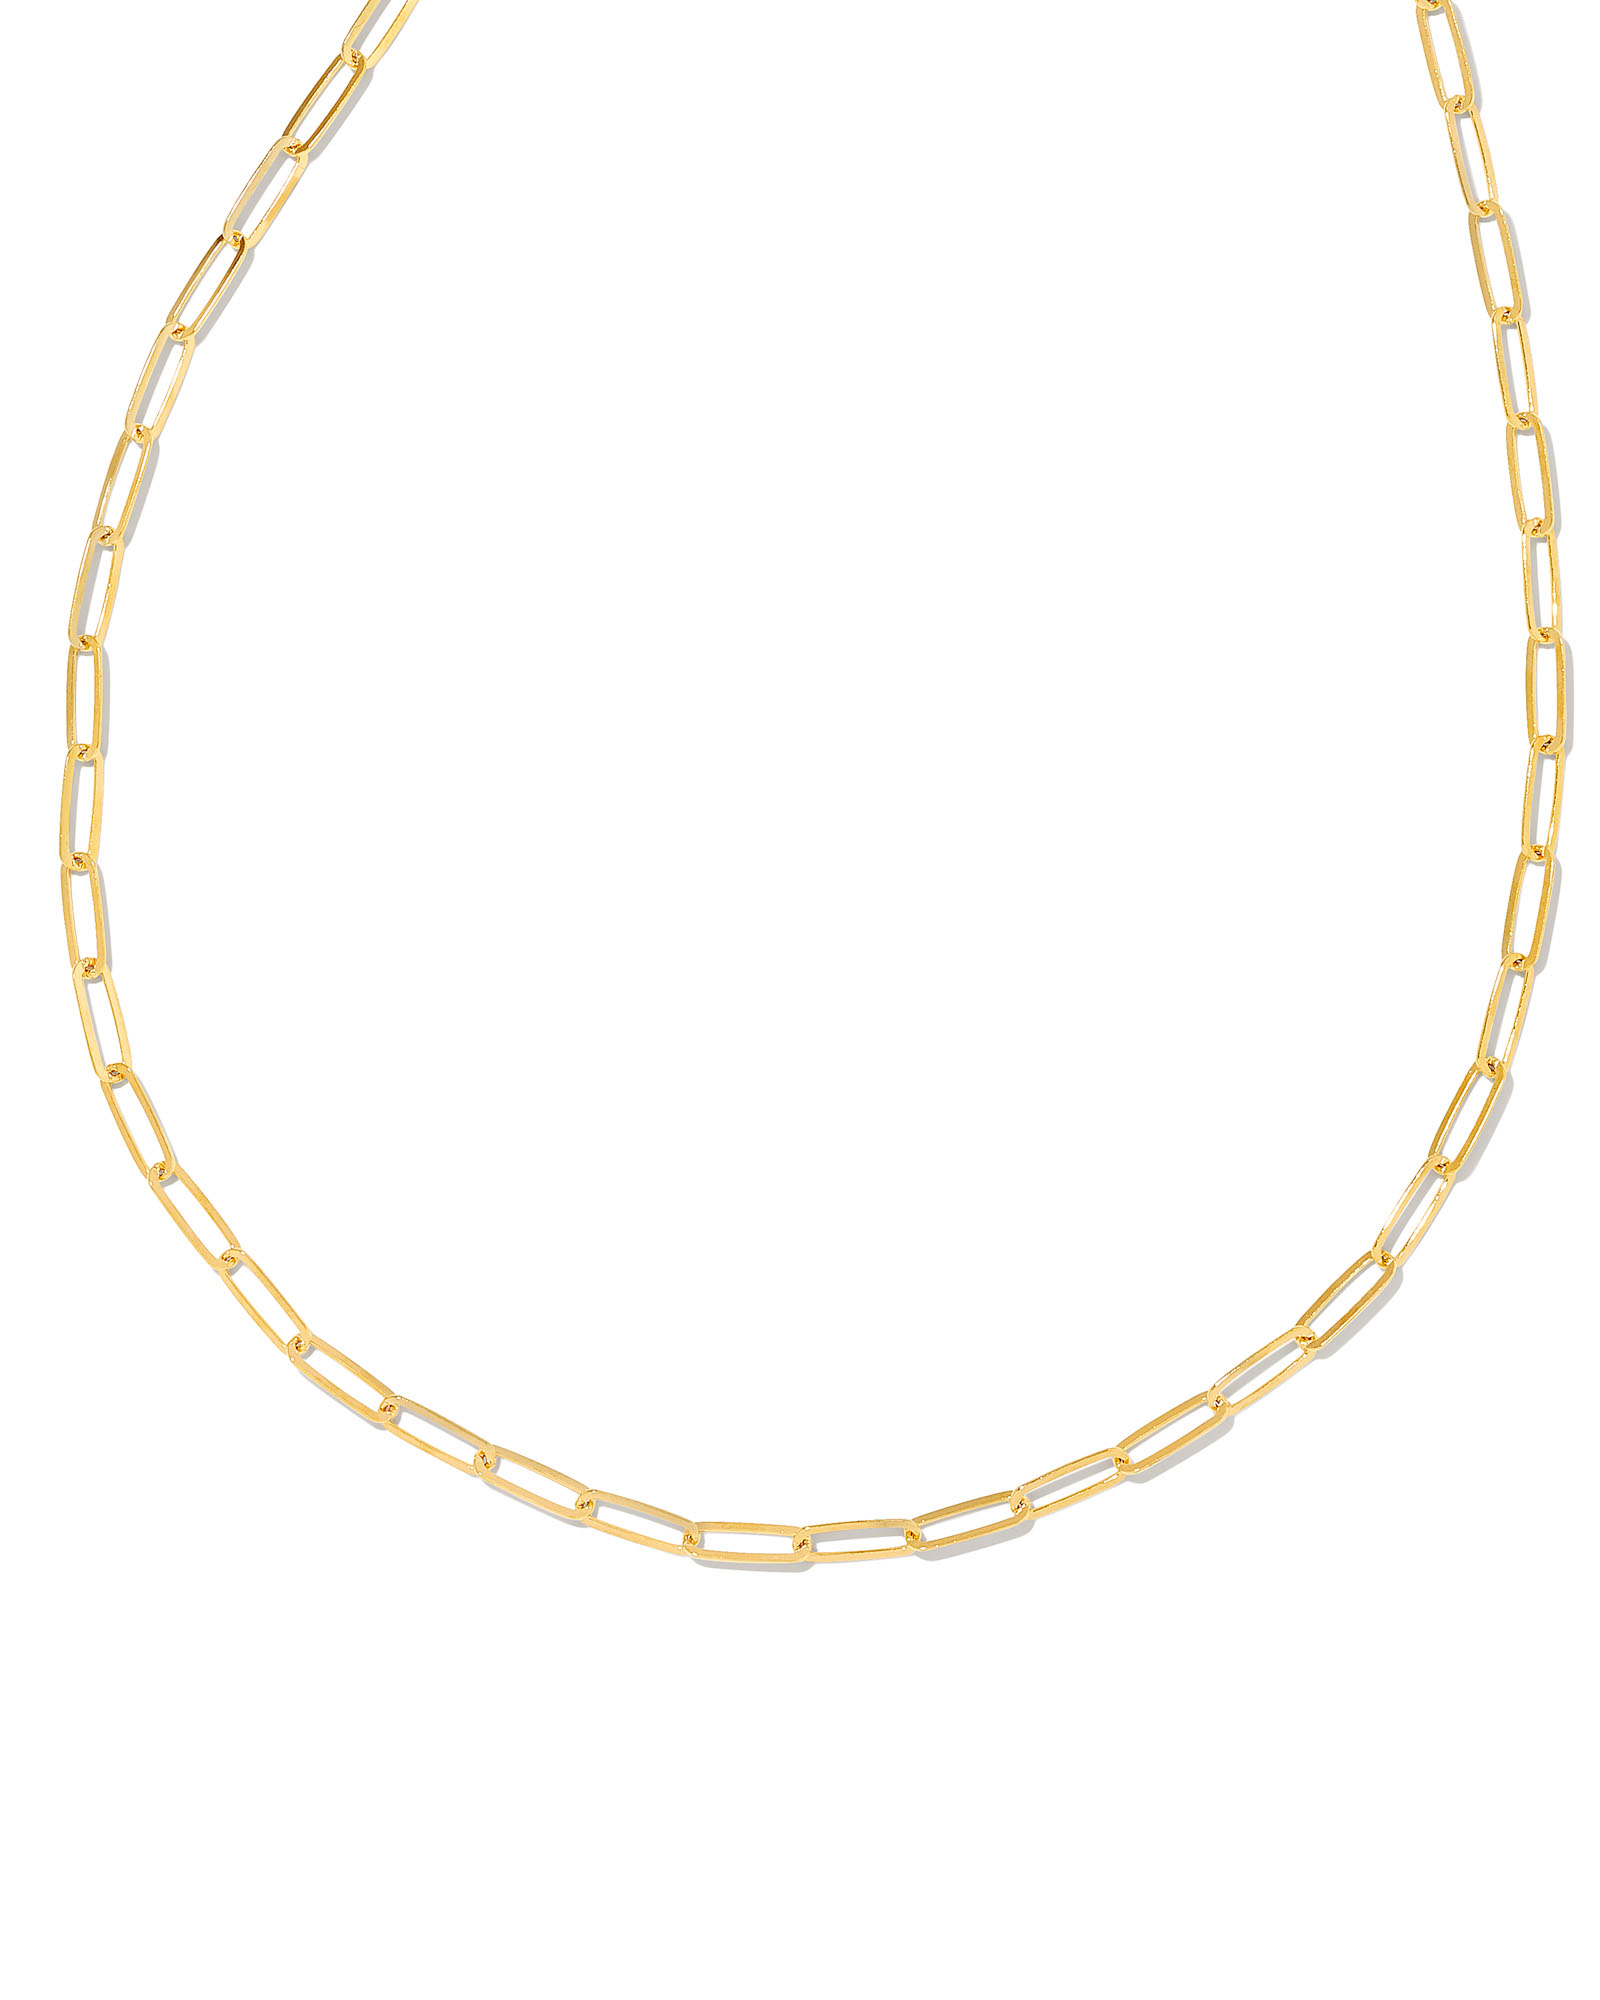 Mini Paperclip Chain Necklace Adjustable 46cm/18' in 18k Gold Vermeil on  Sterling Silver